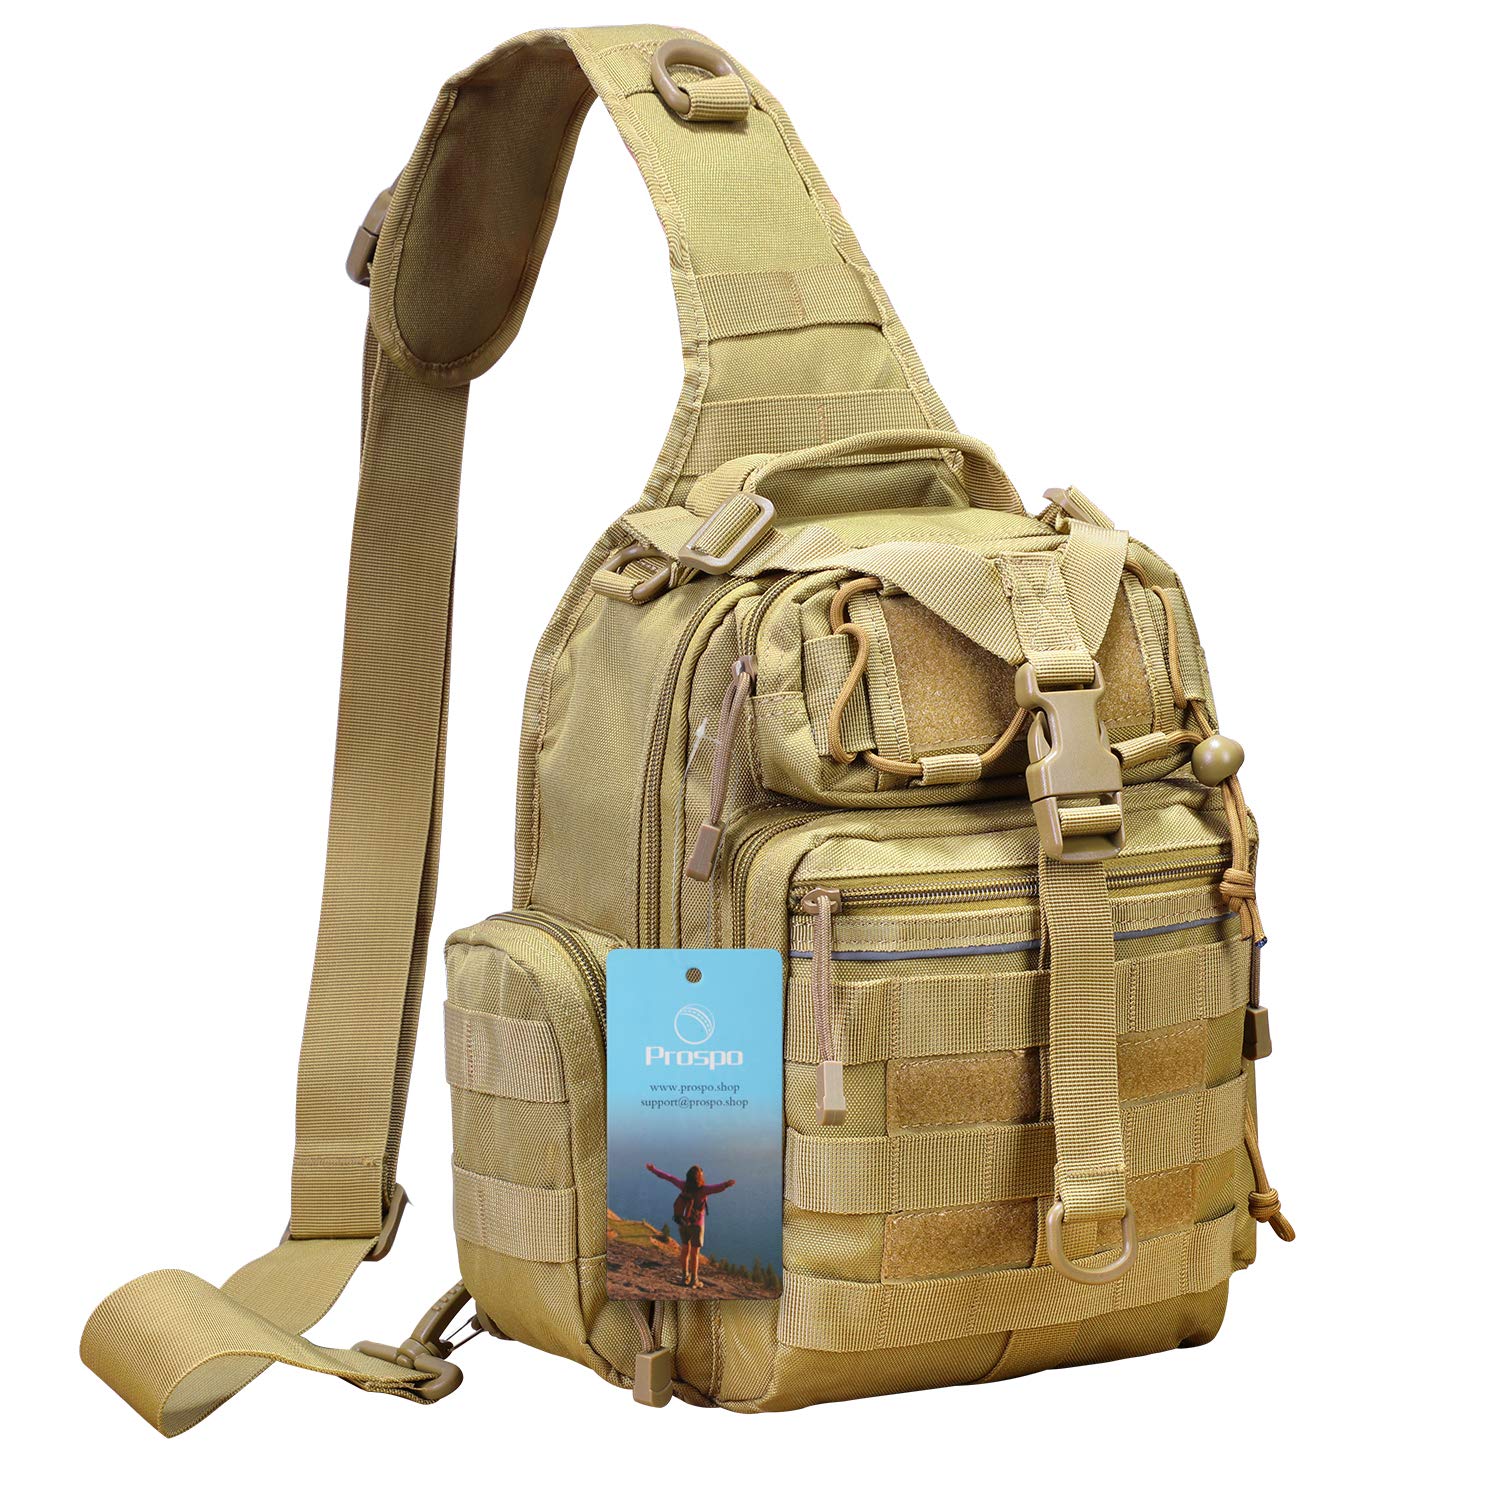 Tactical Sling Backpack Military EDC Shoulder Chest Bag for $16.14 Shipped from Amazon